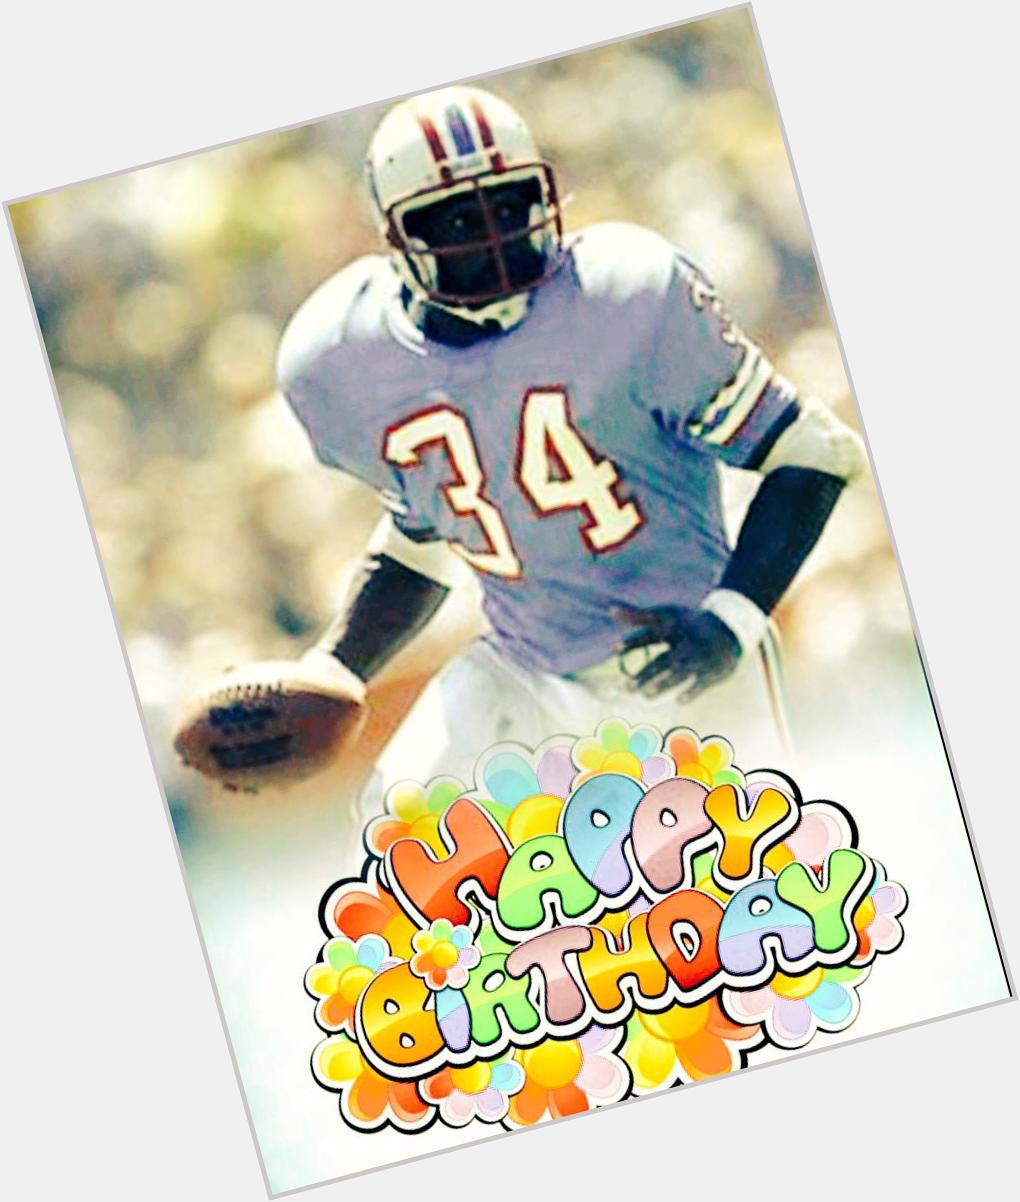 Happy Birthday to one of the best ever,  Earl Campbell! Over his career Earl racked in 9,407 yards and 74 TDs! 